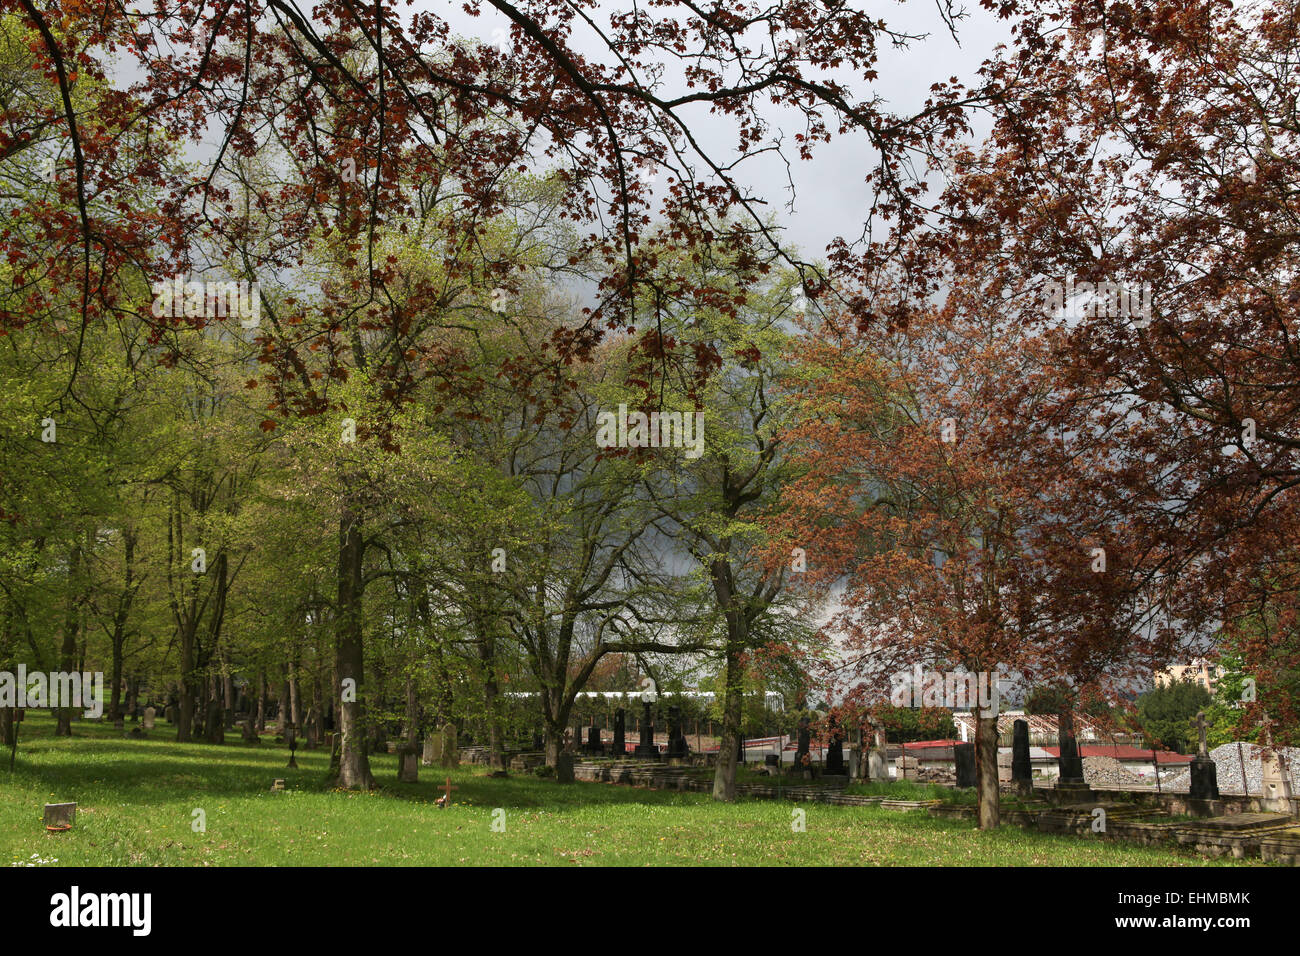 Spring time at the Town Cemetery in Karlovy Vary, Czech Republic. Stock Photo